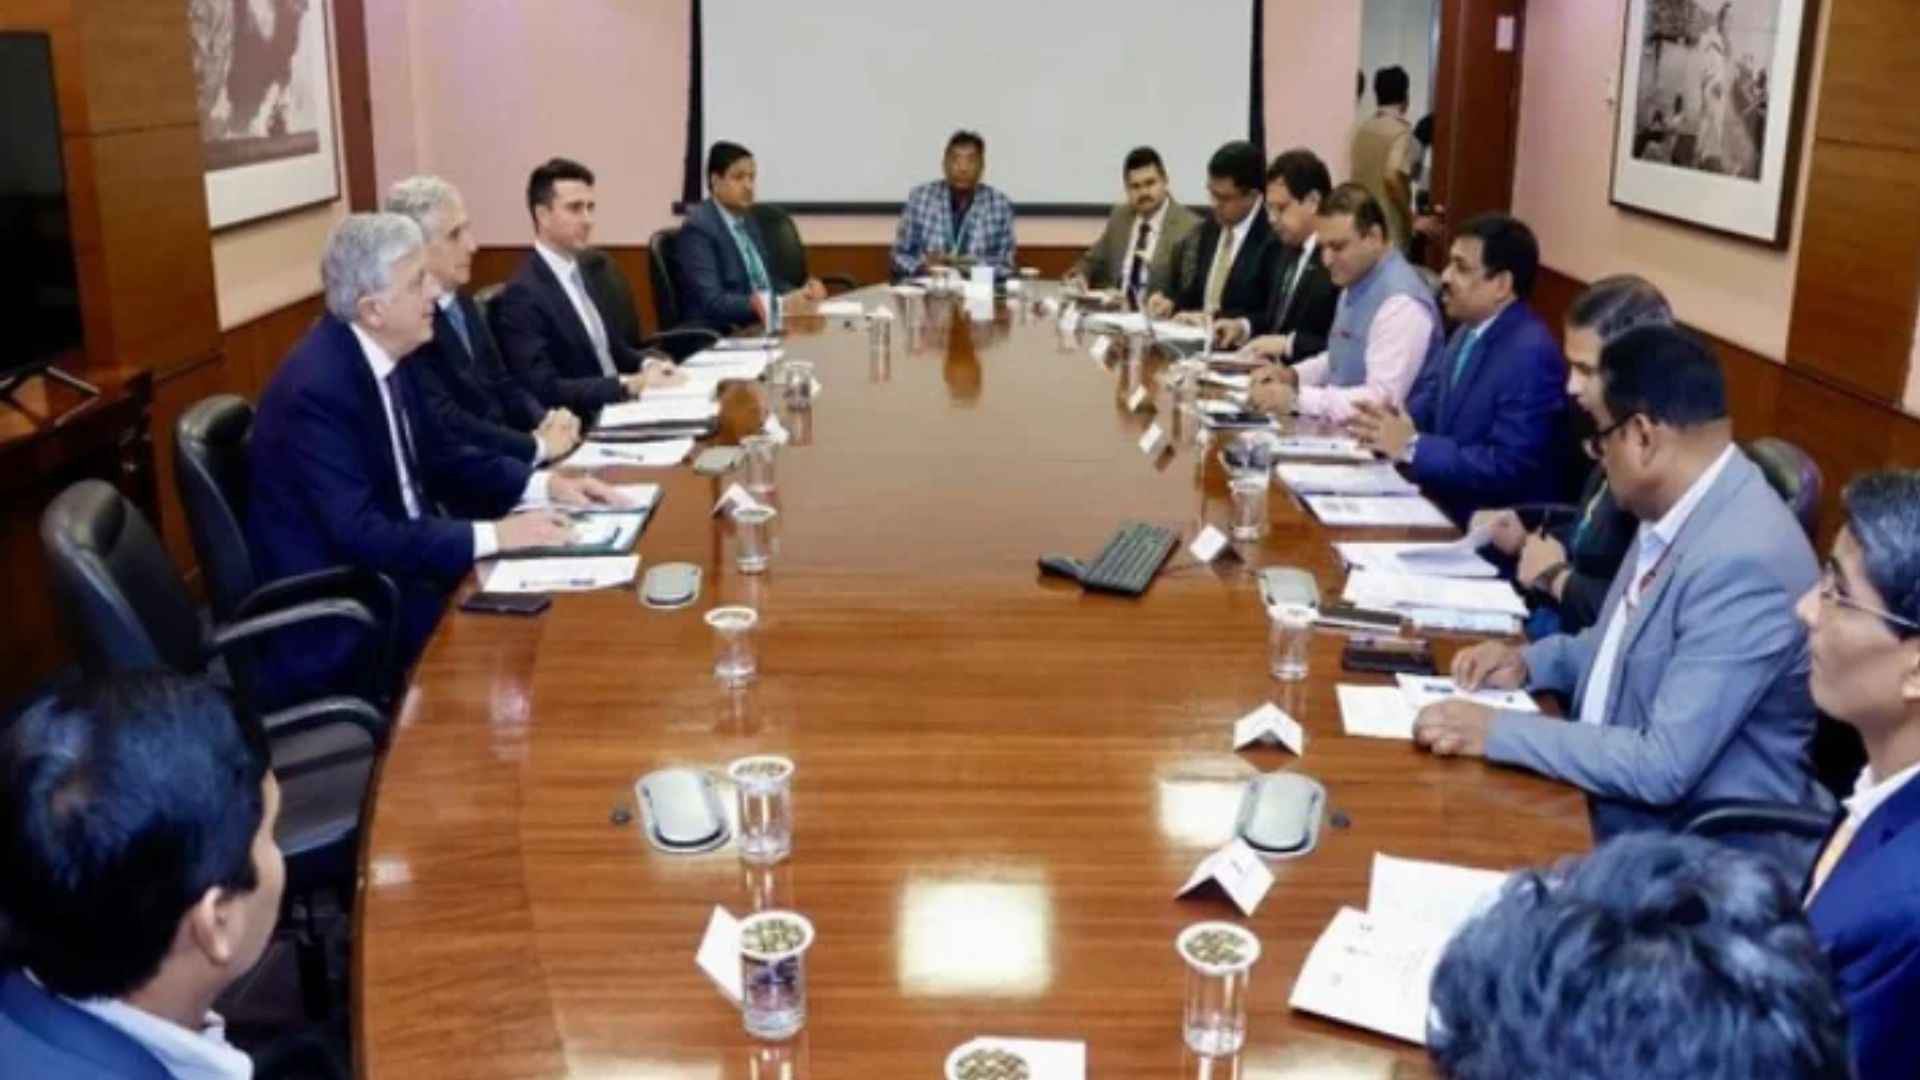 India-Italy Bilateral Consular Dialogue Focuses on Enhancing Cooperation